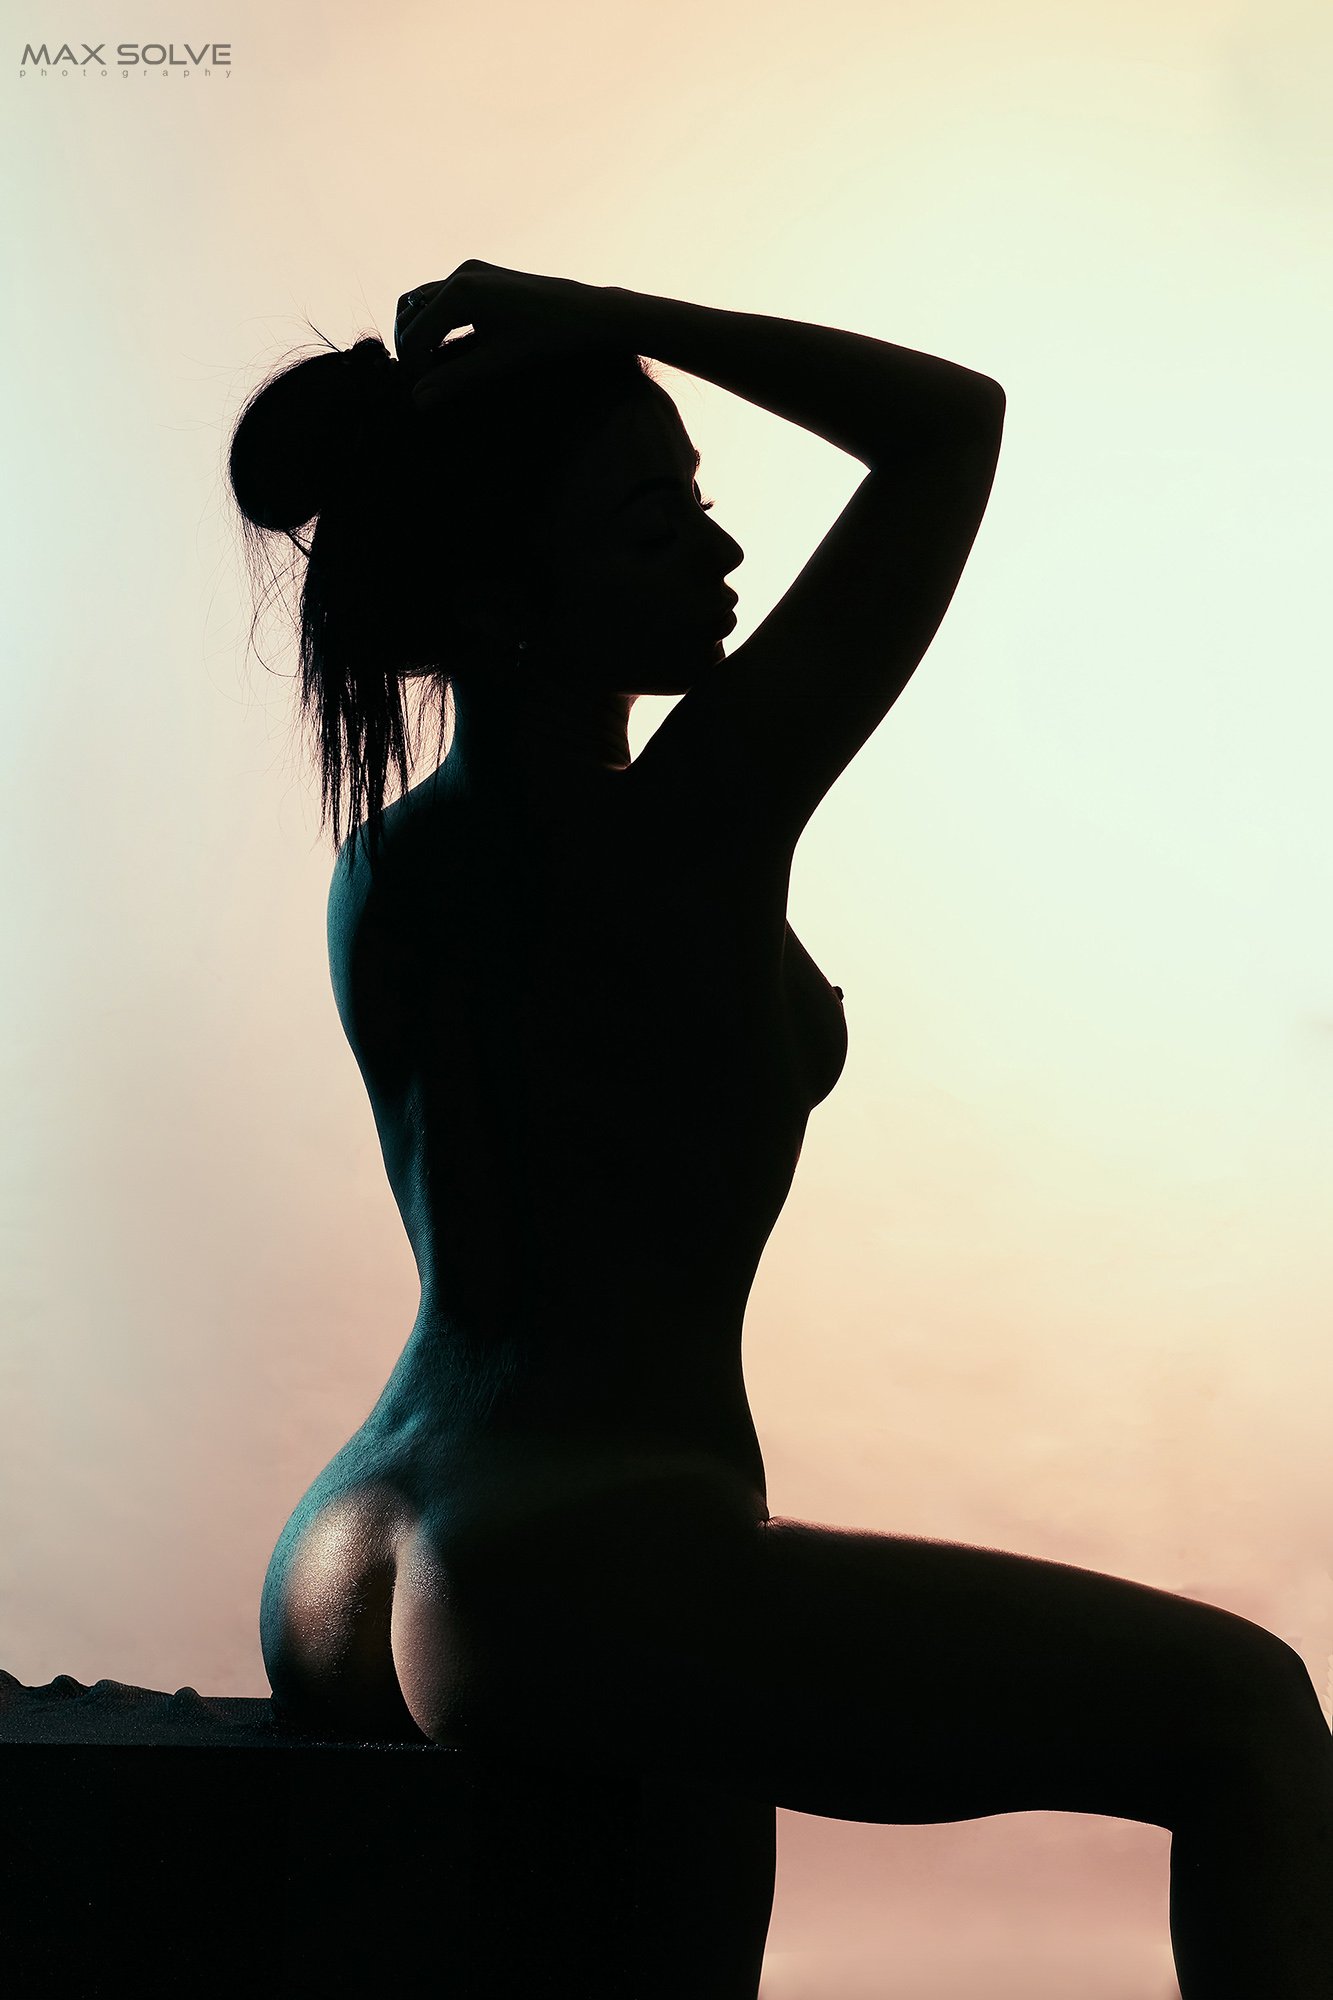 nude, naked, woman, art, girl, model, portrait,studio, sexy, fashion, silhouette, , Max Solve